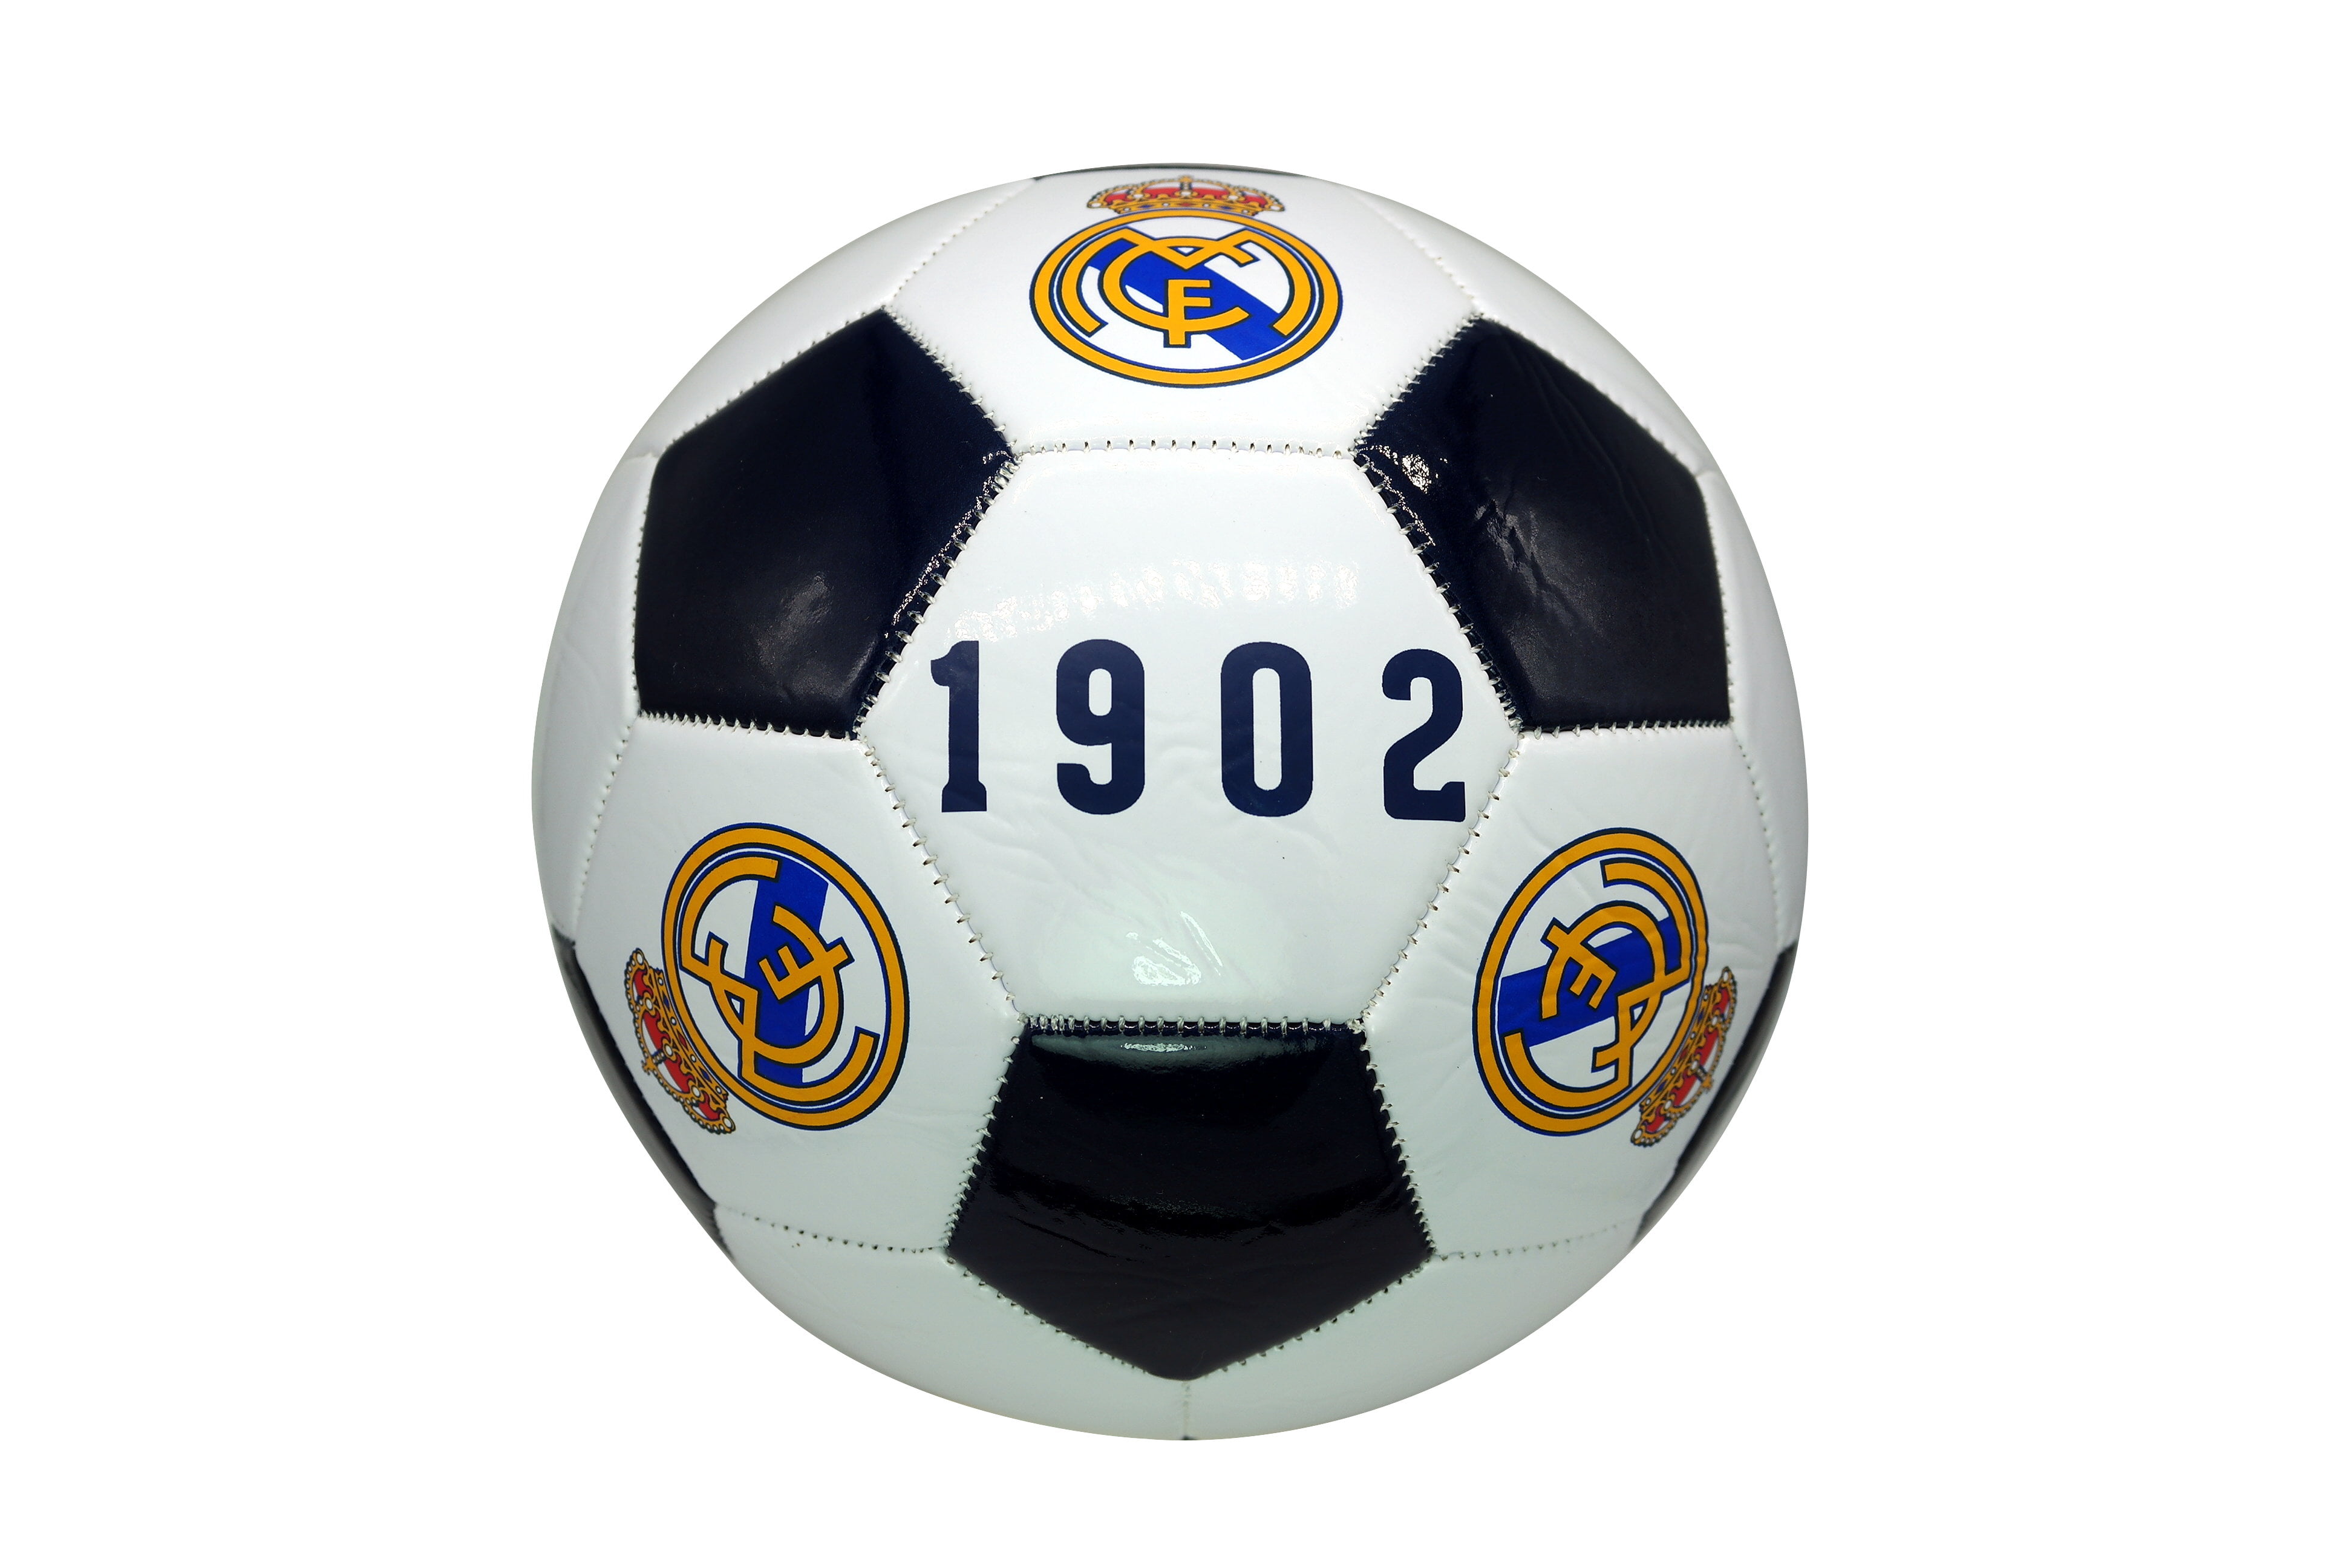 Real Madrid Authentic Official Licensed Soccer Ball Size 5-001 